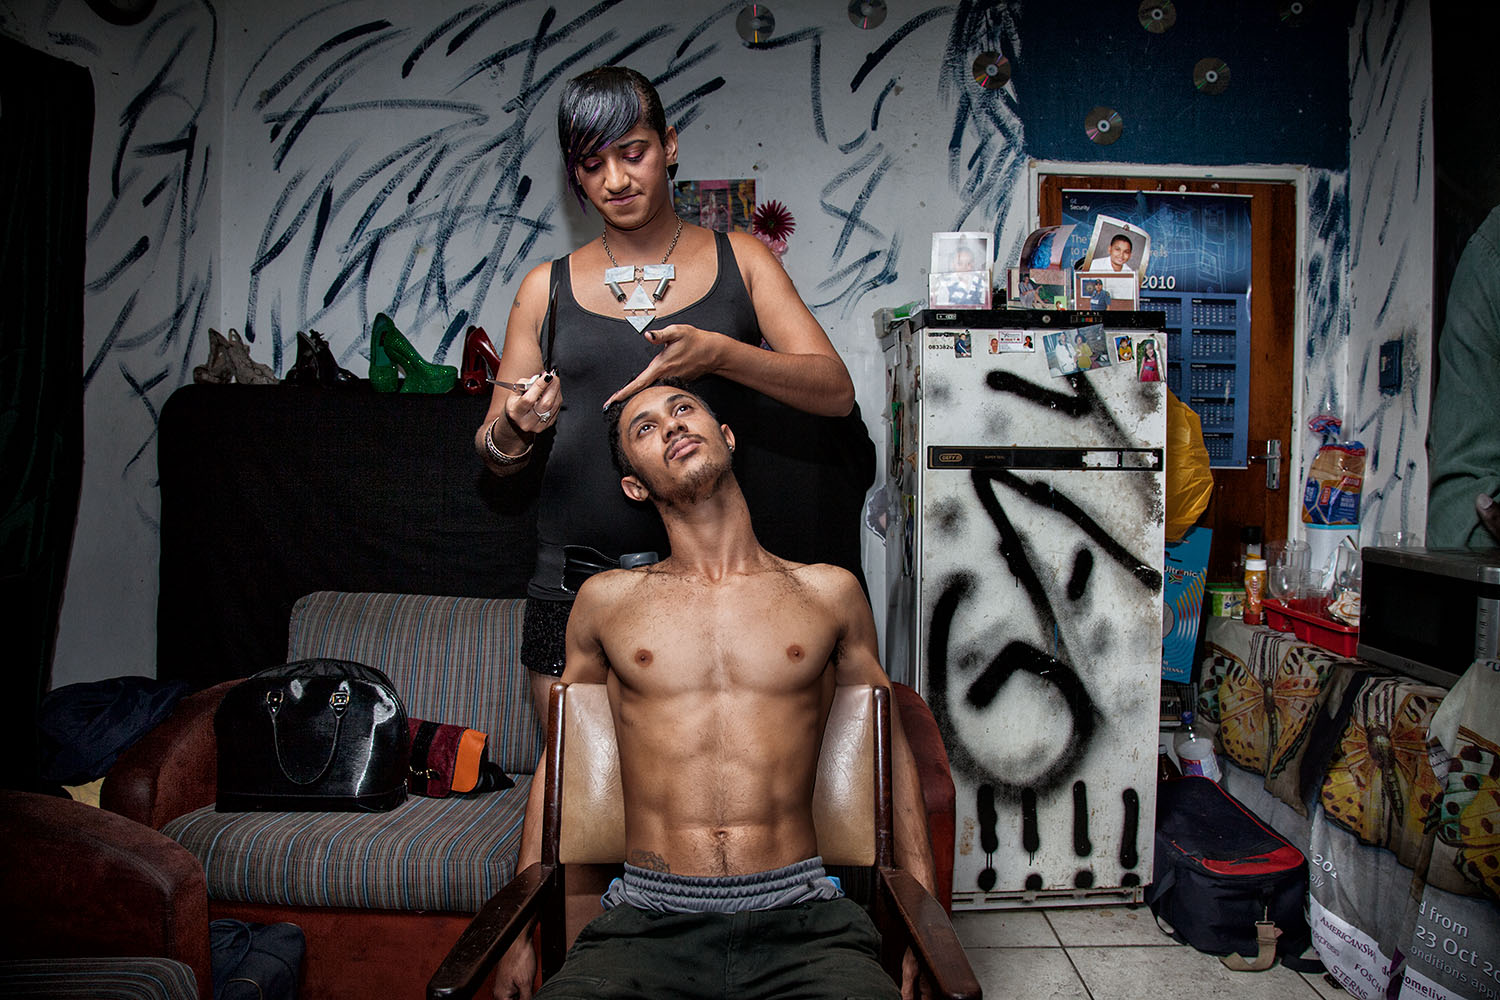  Chedino cuts the hair of a friend at Miss Whall’s house, Ravensmead, Cape Town, 2014.   Aside from her job in a call center, Chedino worked as a hairdresser to earn some extra money. 